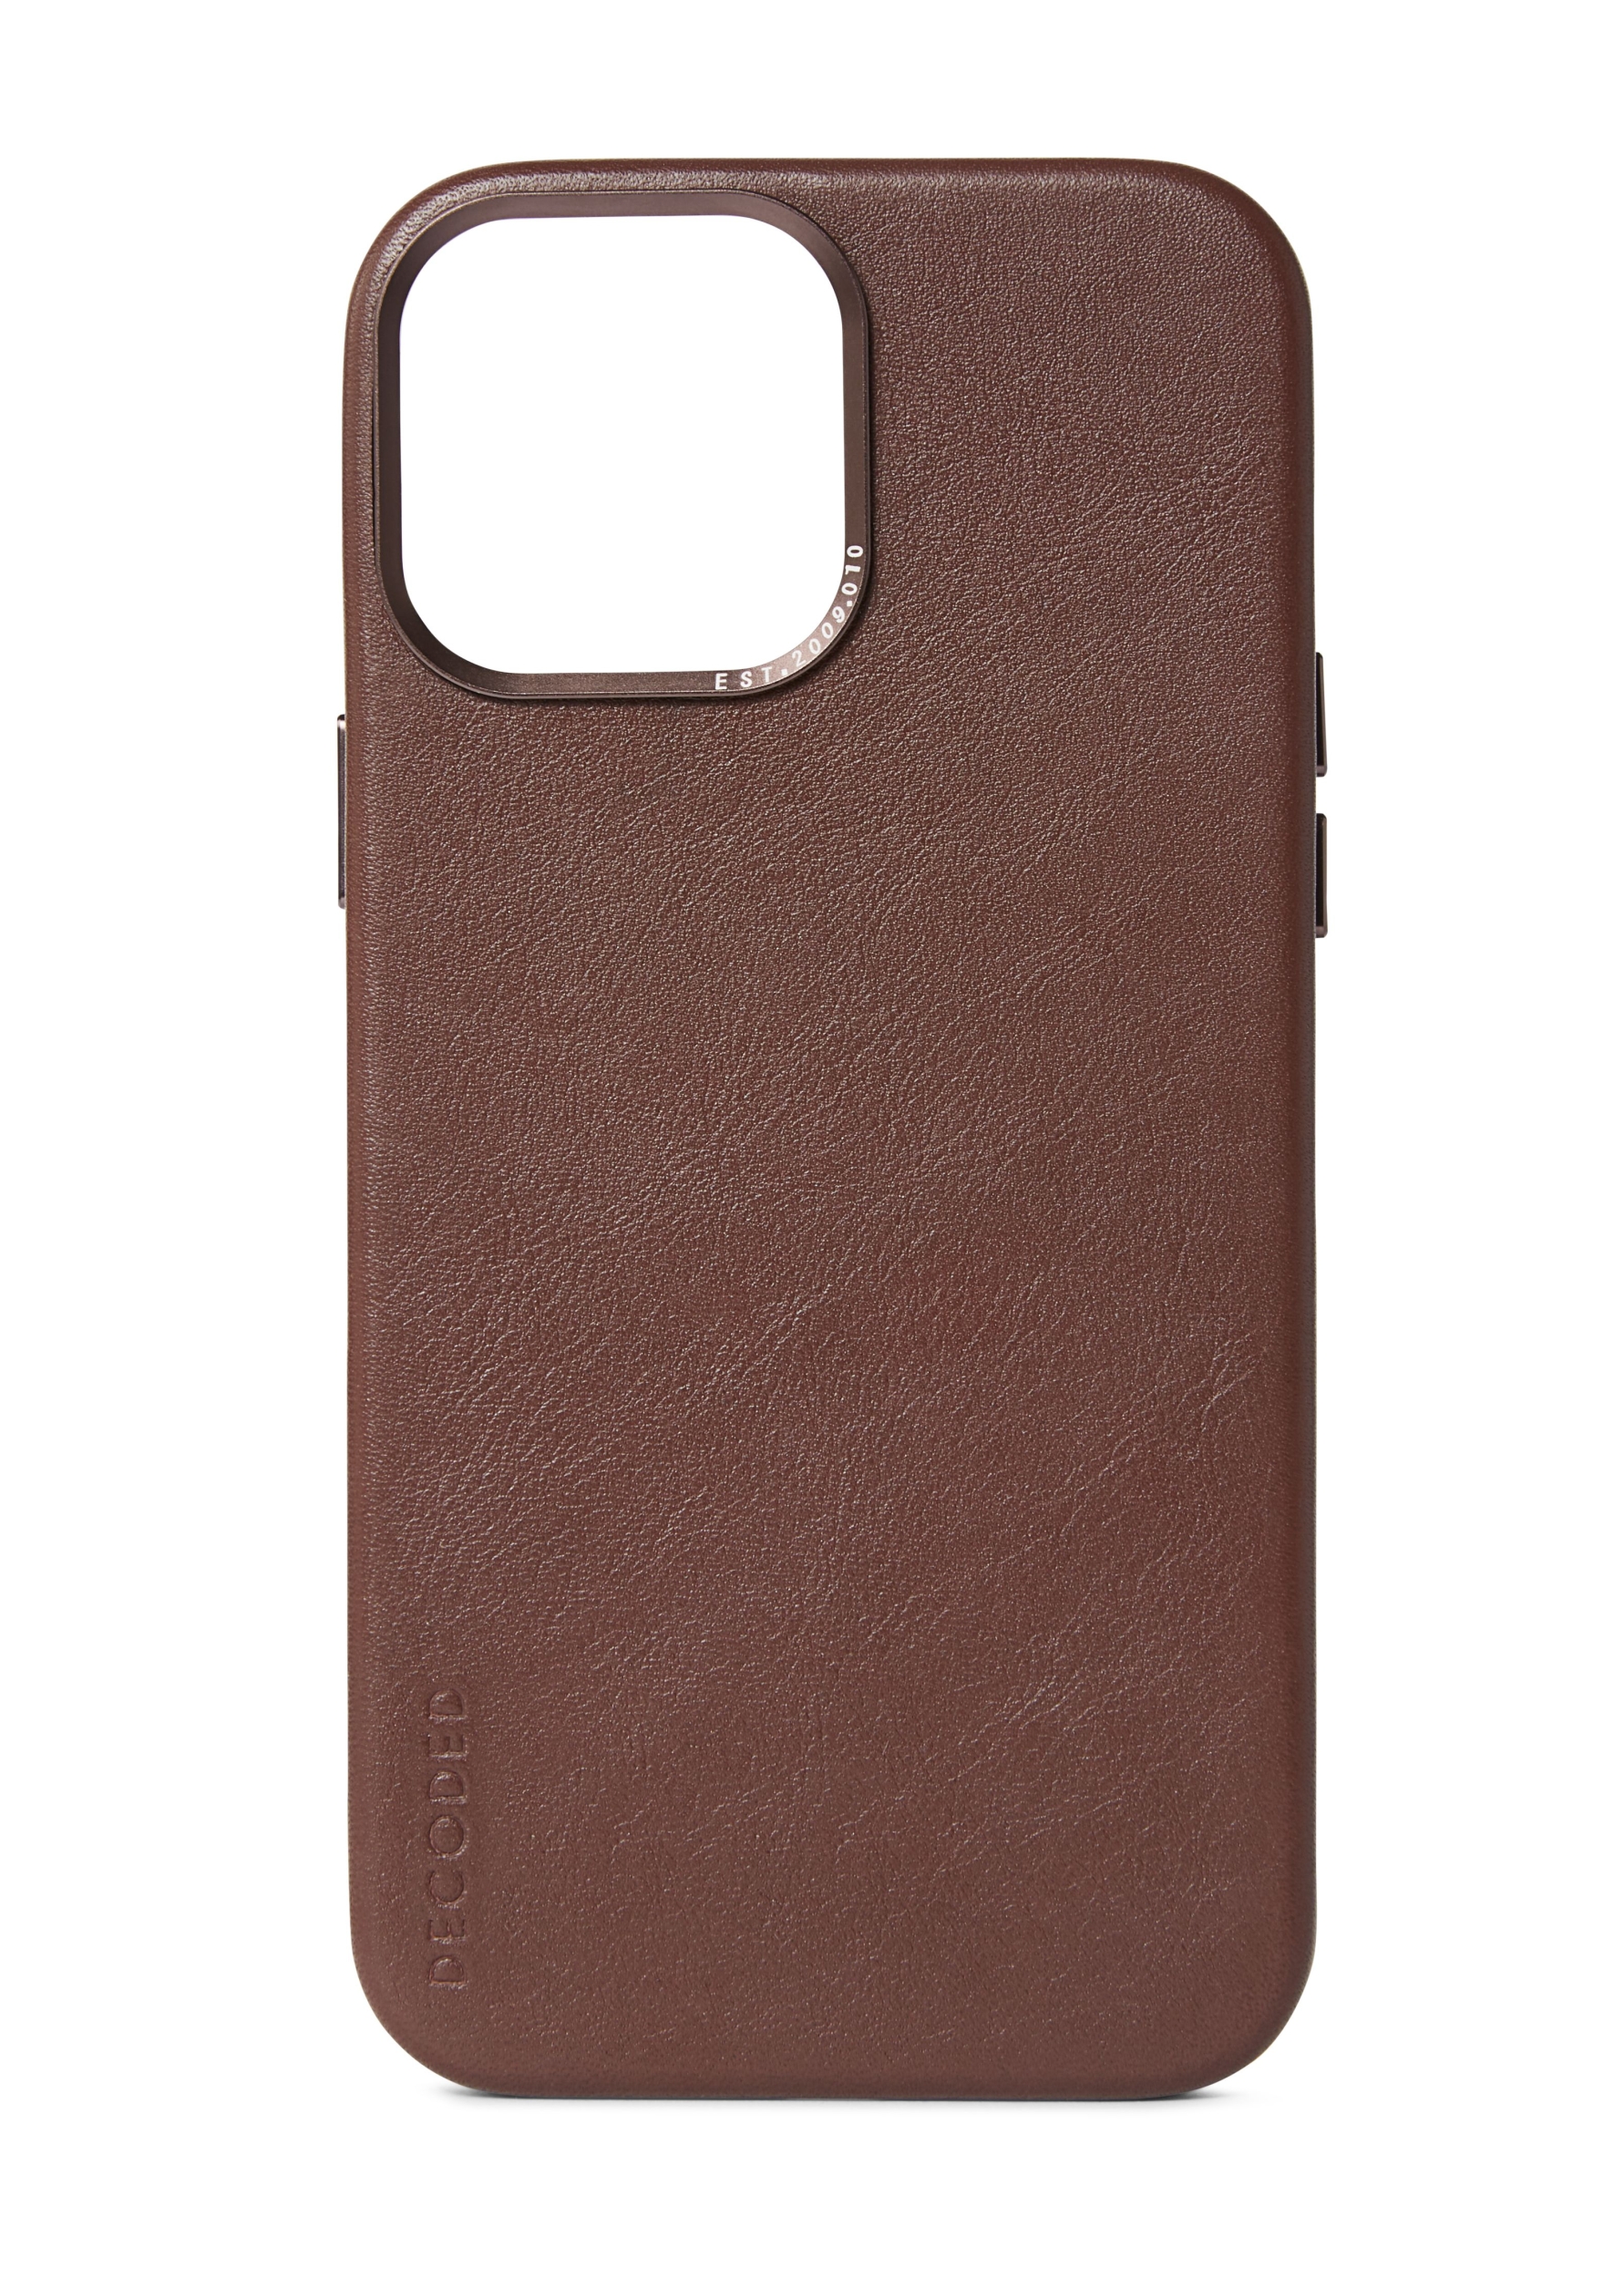 iPhone 13 Pro Max, leather case magsafe, chocolate brown